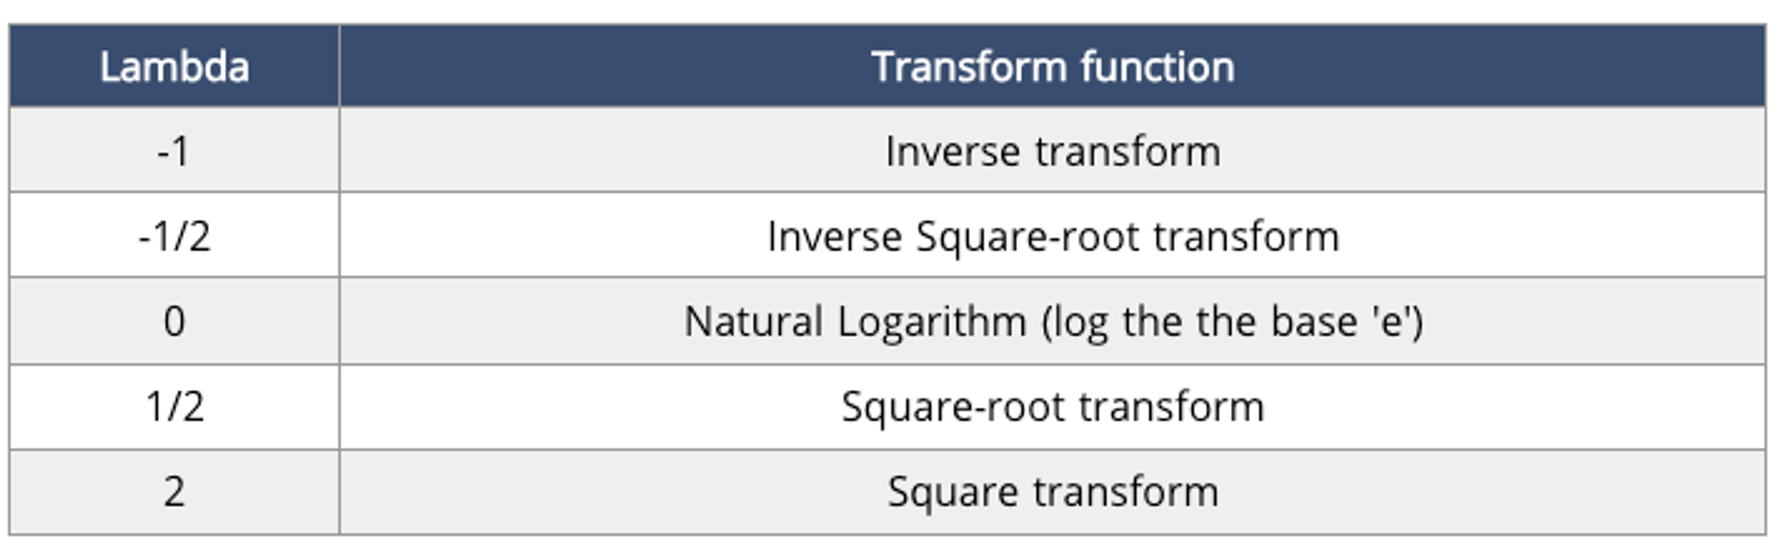 Table showing lambda values and corresponding transformation functions.